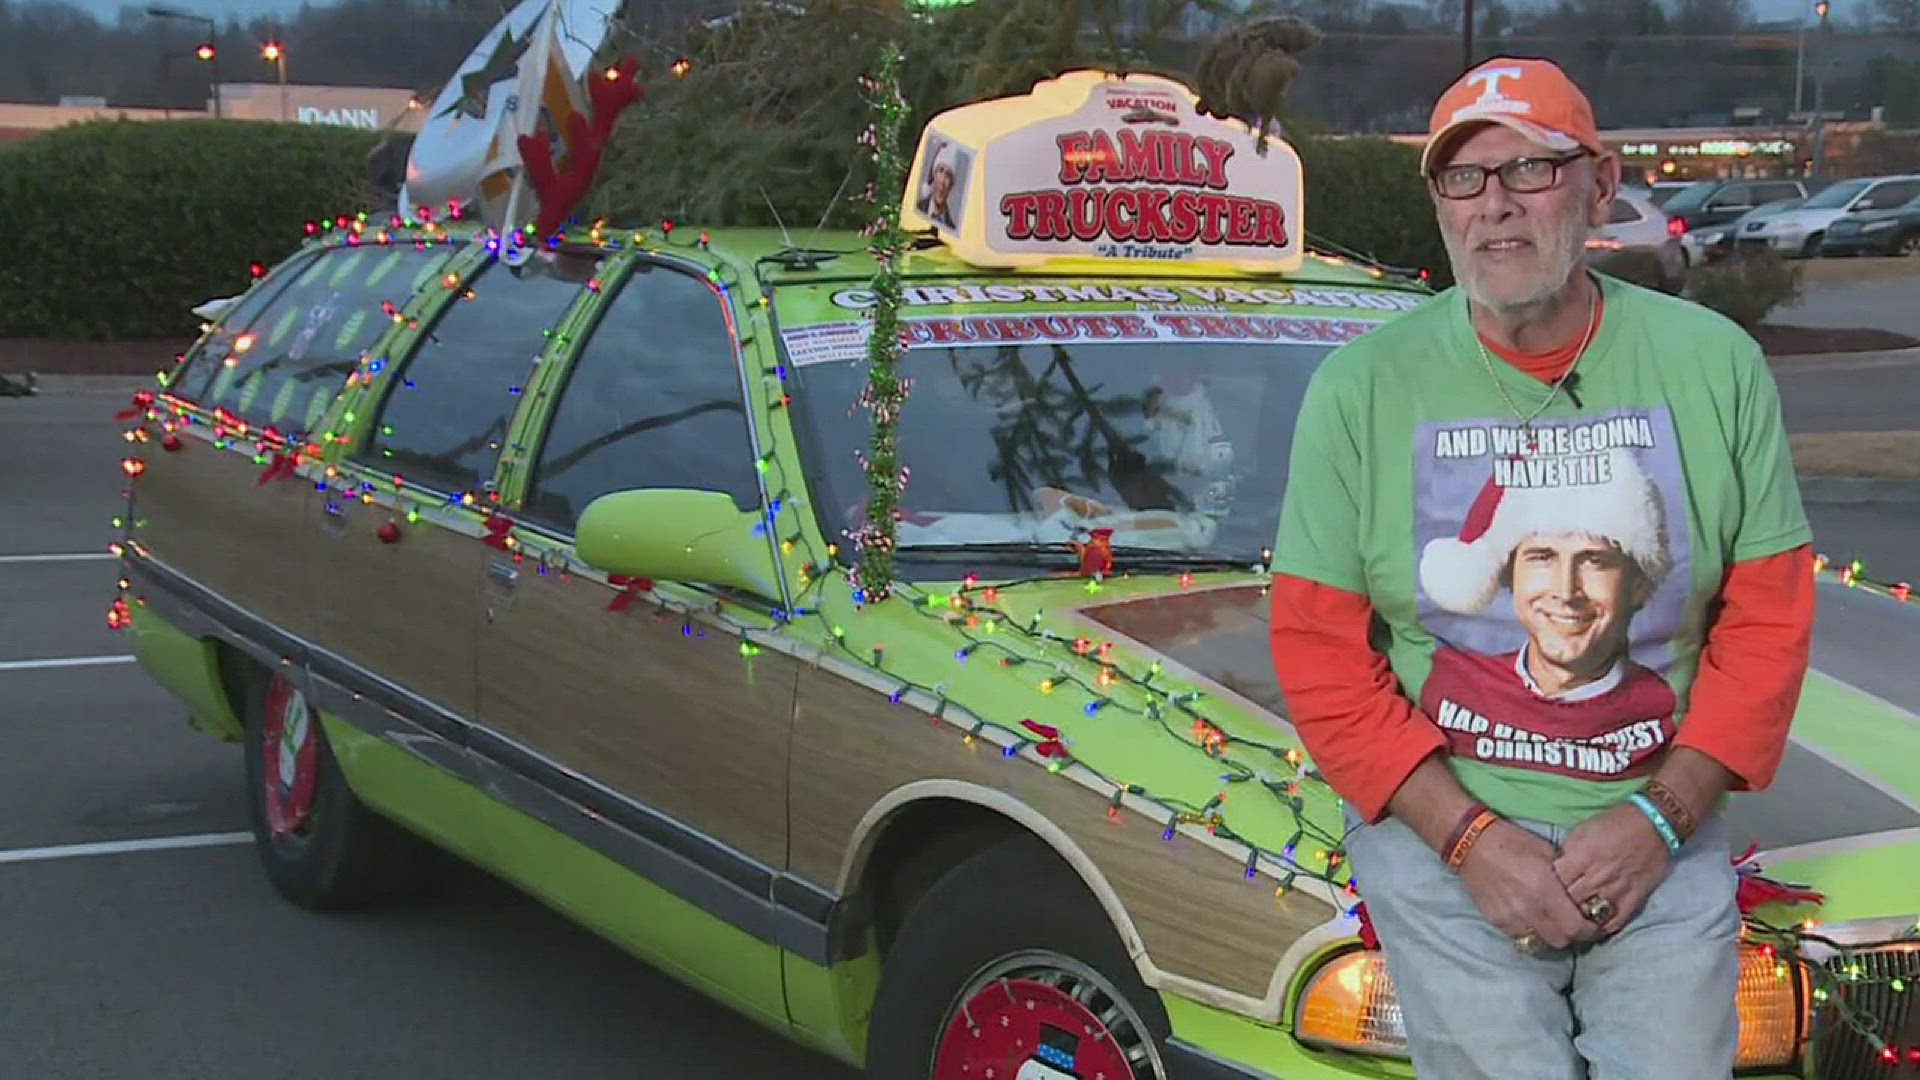 An East Tennessee man's decked out station wagon brings holiday cheer to many who see it. Dec. 23, 2016